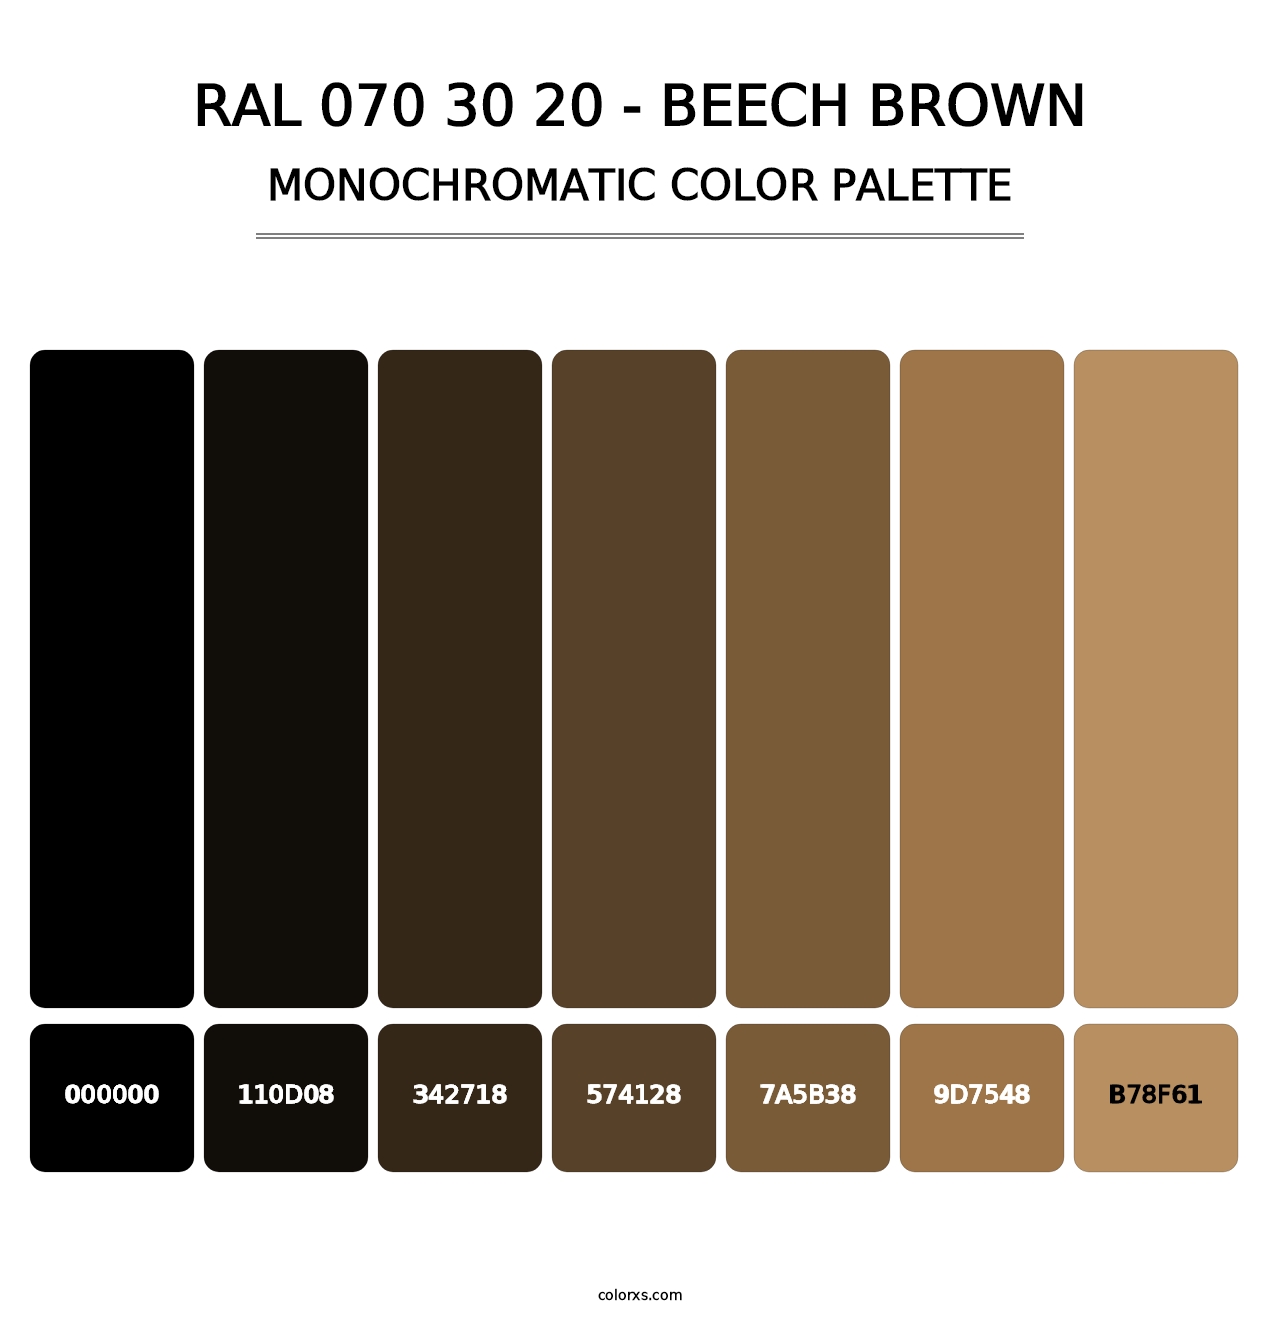 RAL 070 30 20 - Beech Brown - Monochromatic Color Palette